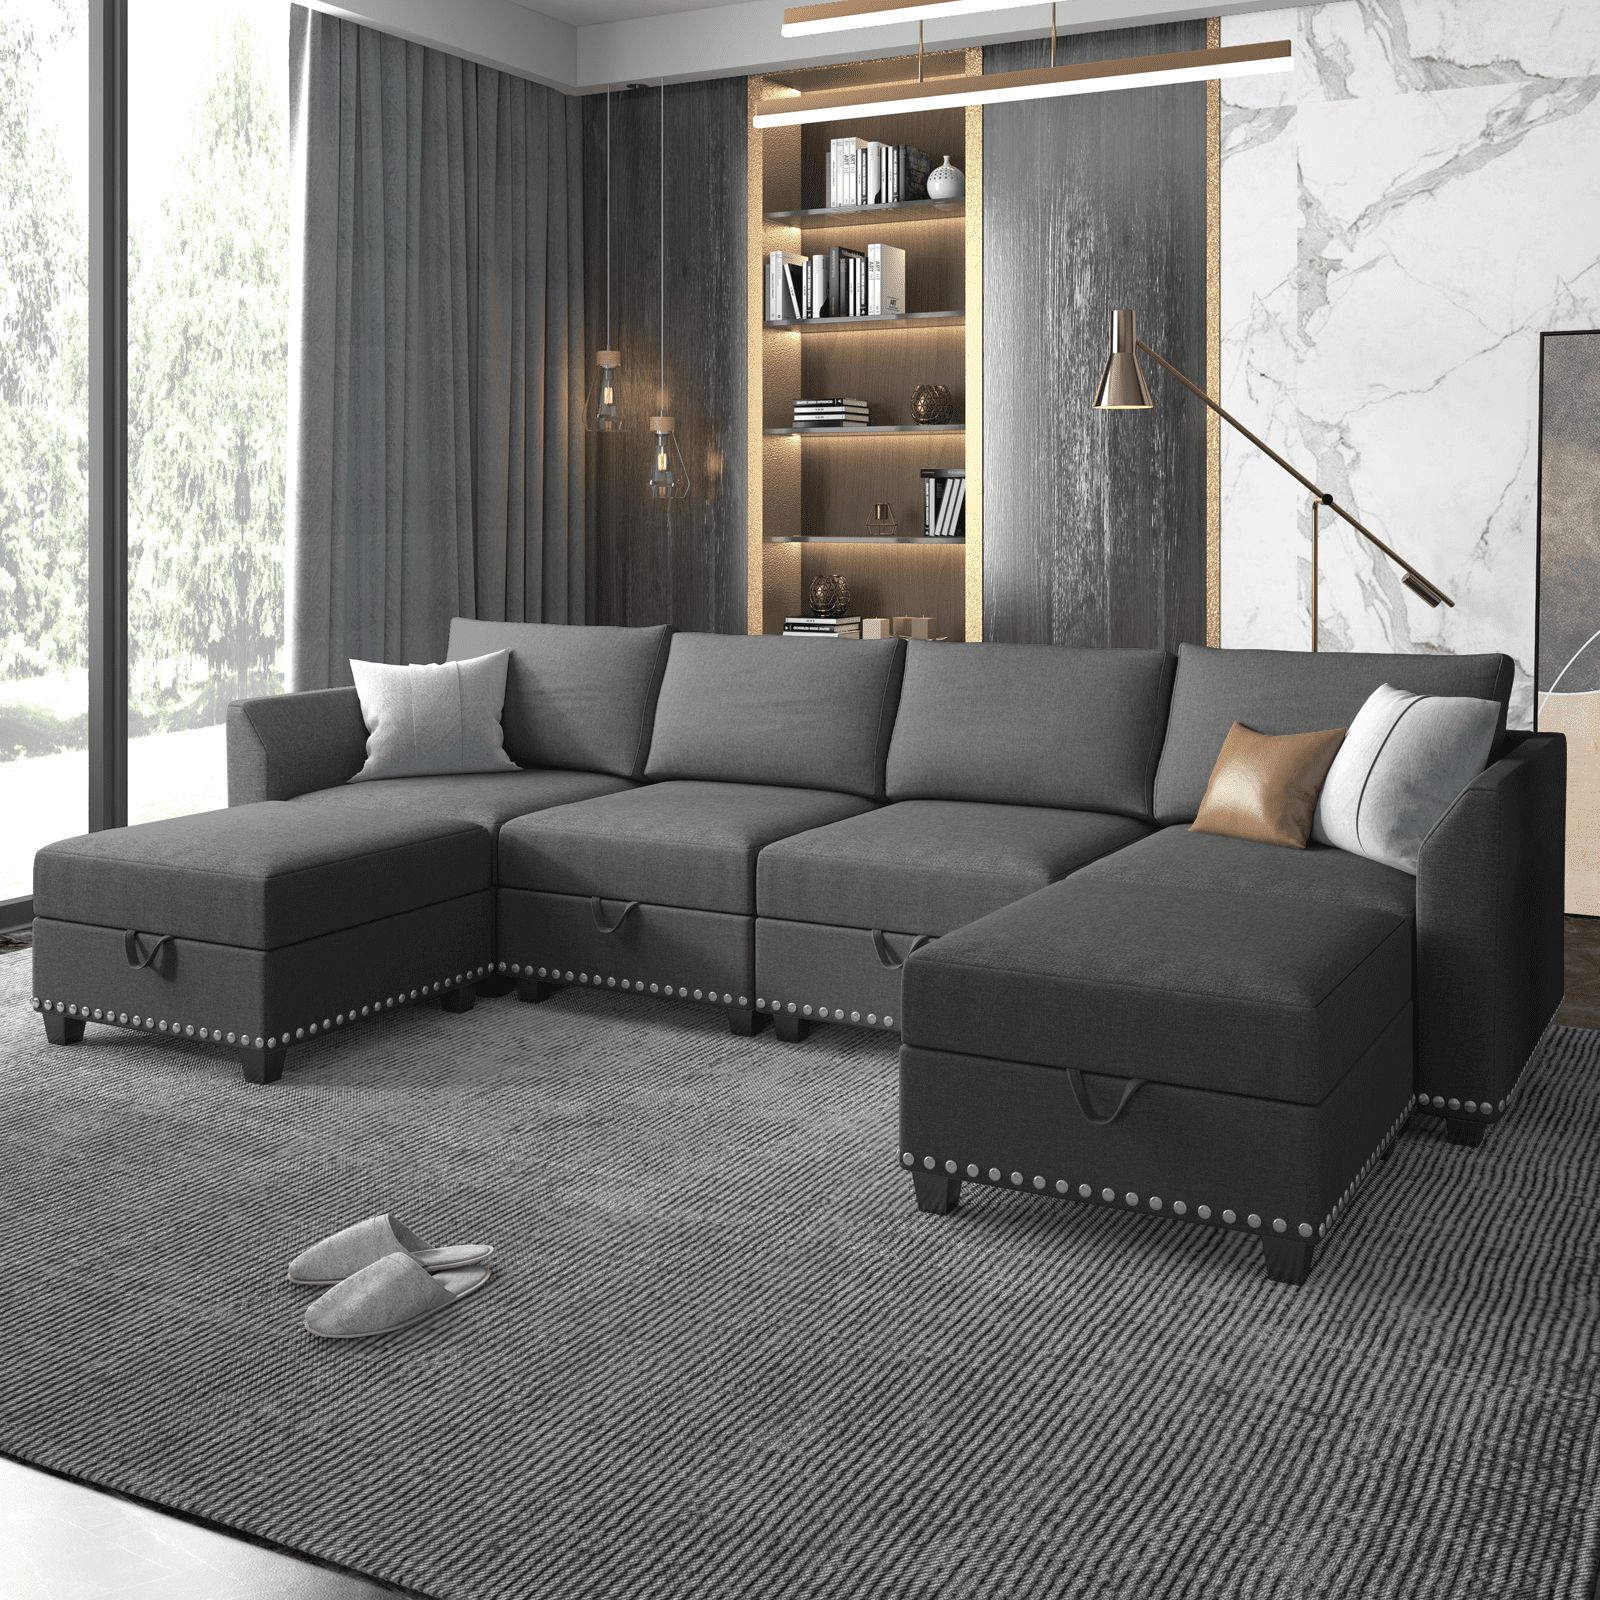 Mjkone U Shaped Sectional Sofa With Storage, 6 Seater Modular Sectional Sofa  With Nailhead Trim, Oversized Sleeper Sofa Couch Bed, Convertible Couches  For Living Room,free Combination (dark Grey） – Walmart Within 6 Seater Sectional Couches (View 11 of 20)